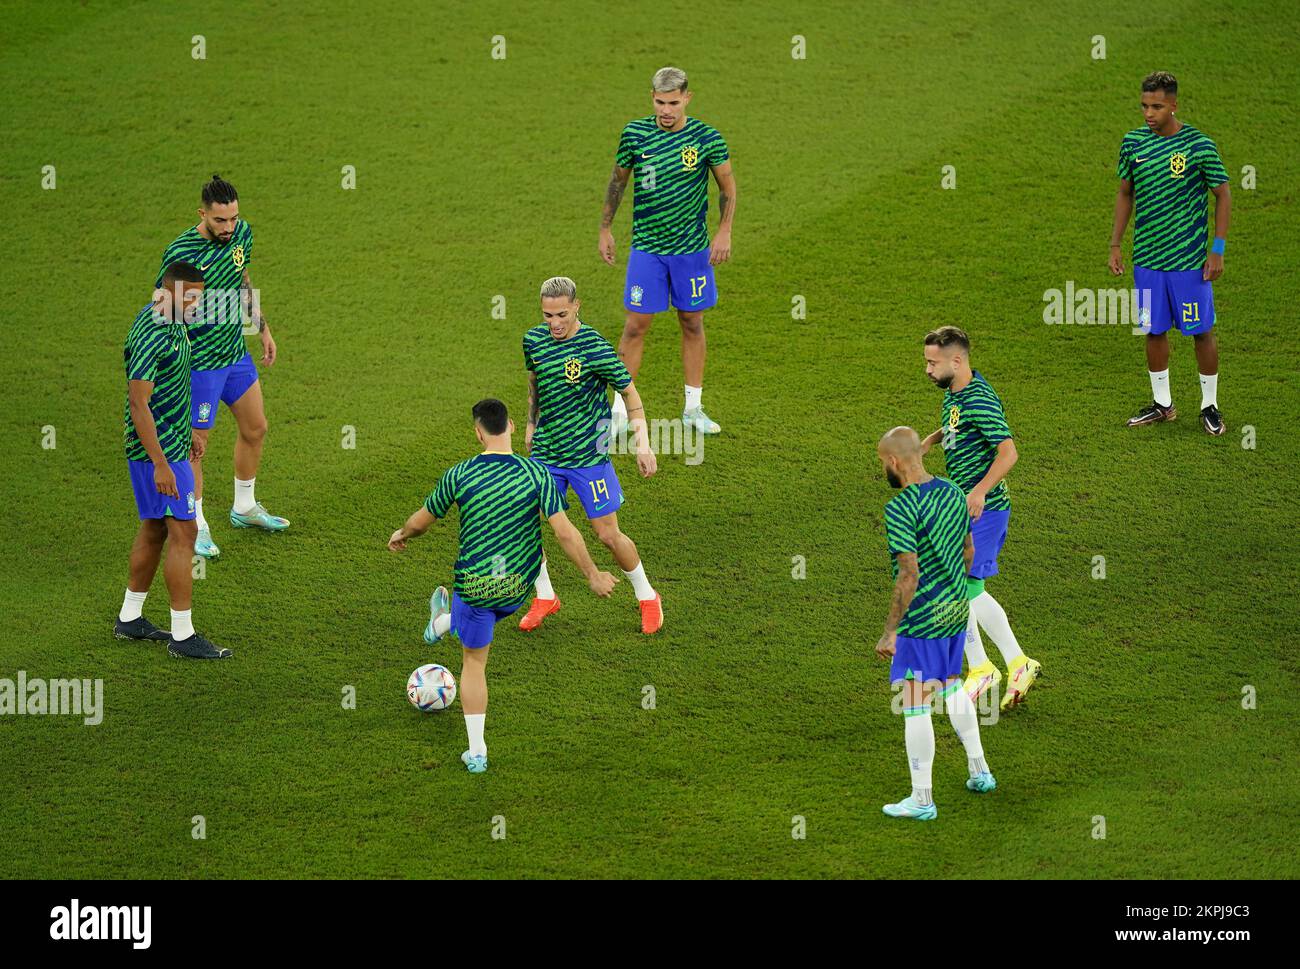 Brazil players warming up before the FIFA World Cup Group G match at Stadium 974 in Doha, Qatar